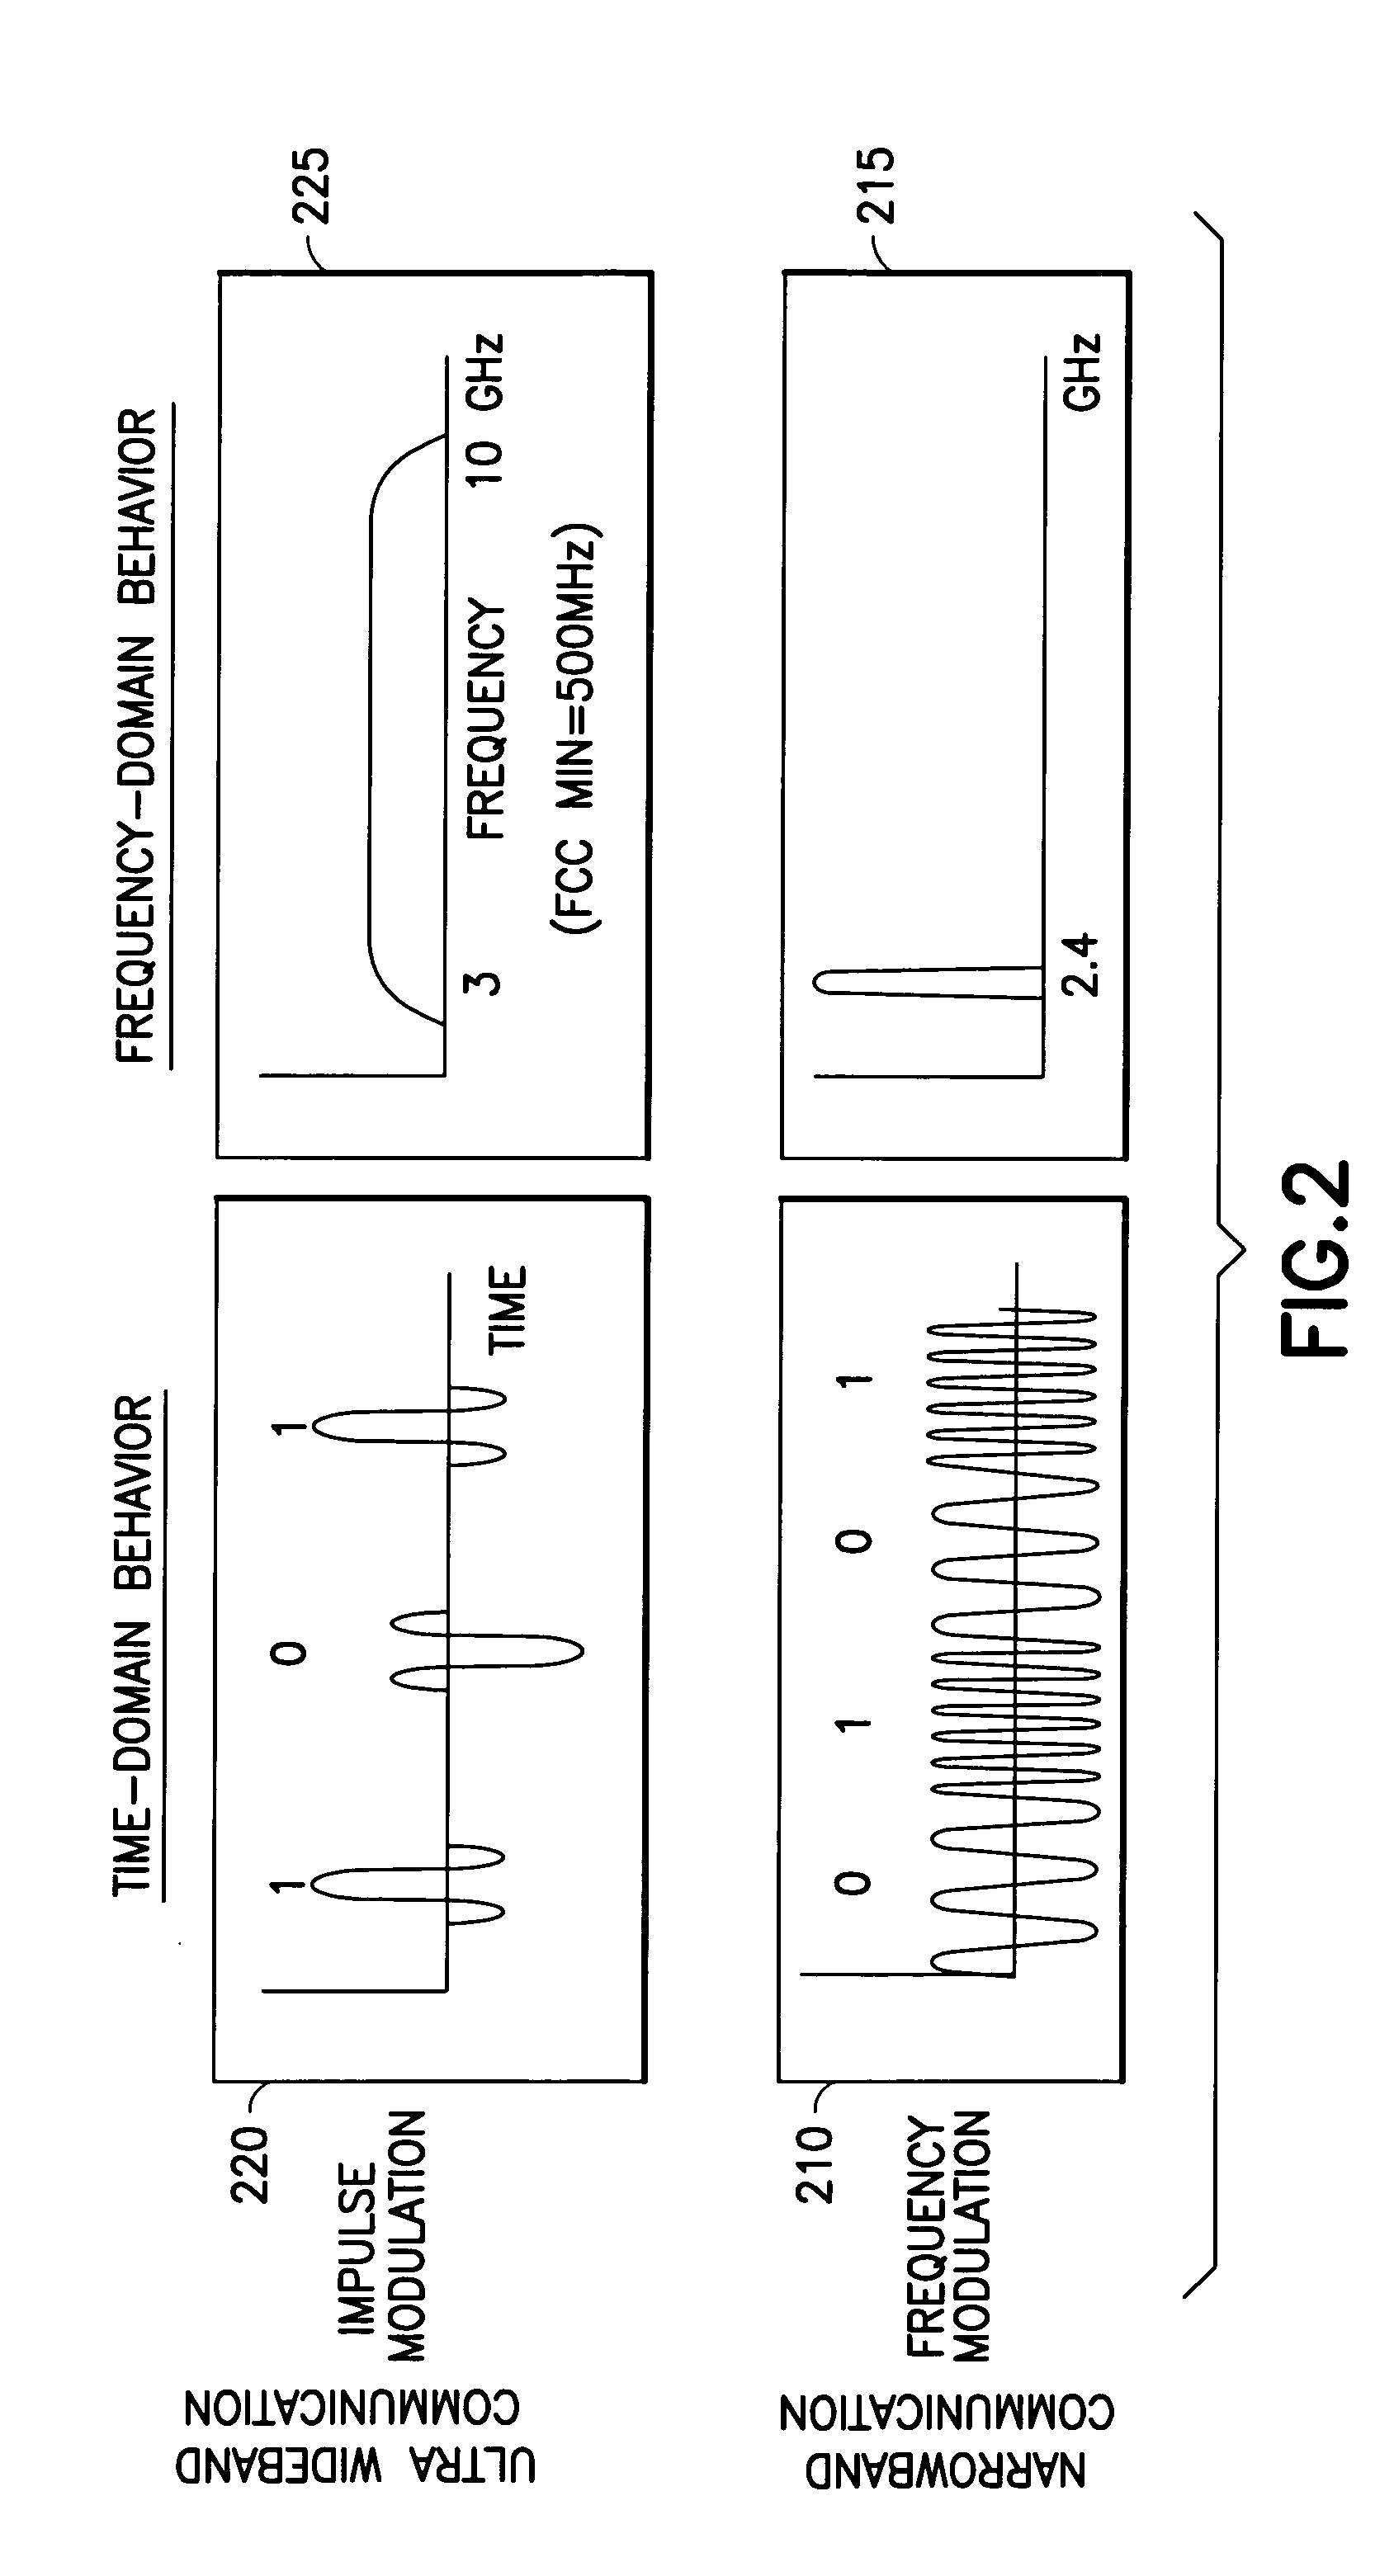 Mobile terminal having UWB and cellular capability